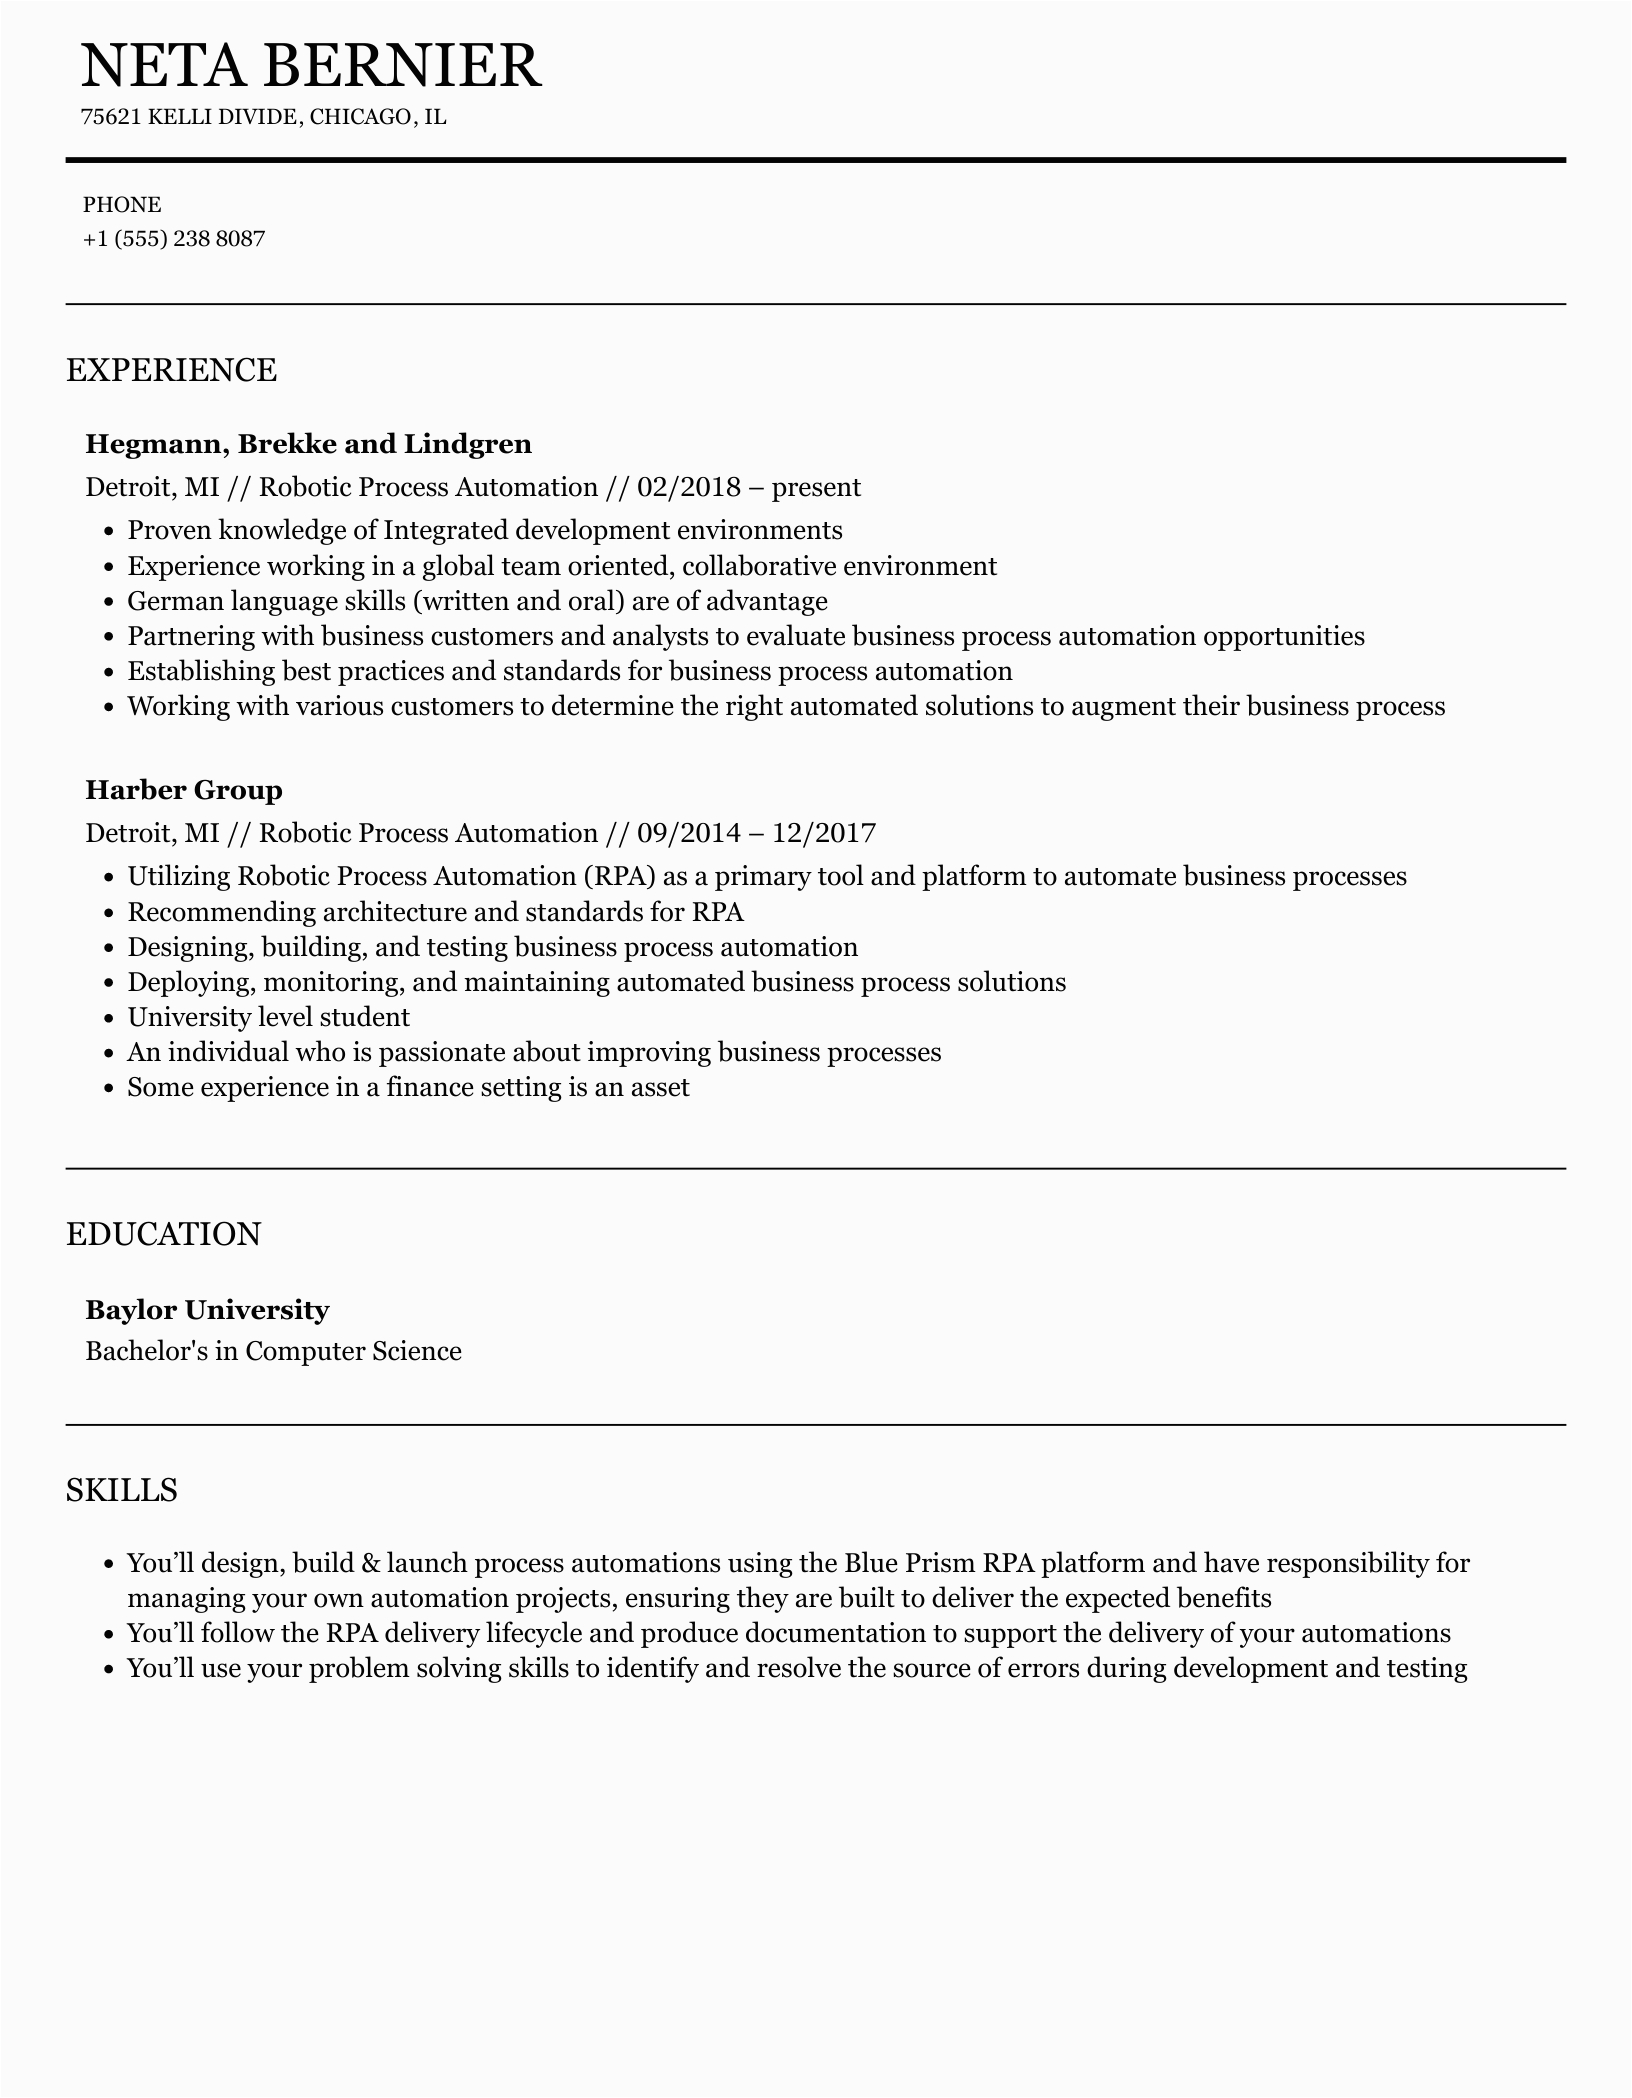 Sample Resume for Robotic Process Automation Robotic Process Automation Resume Samples